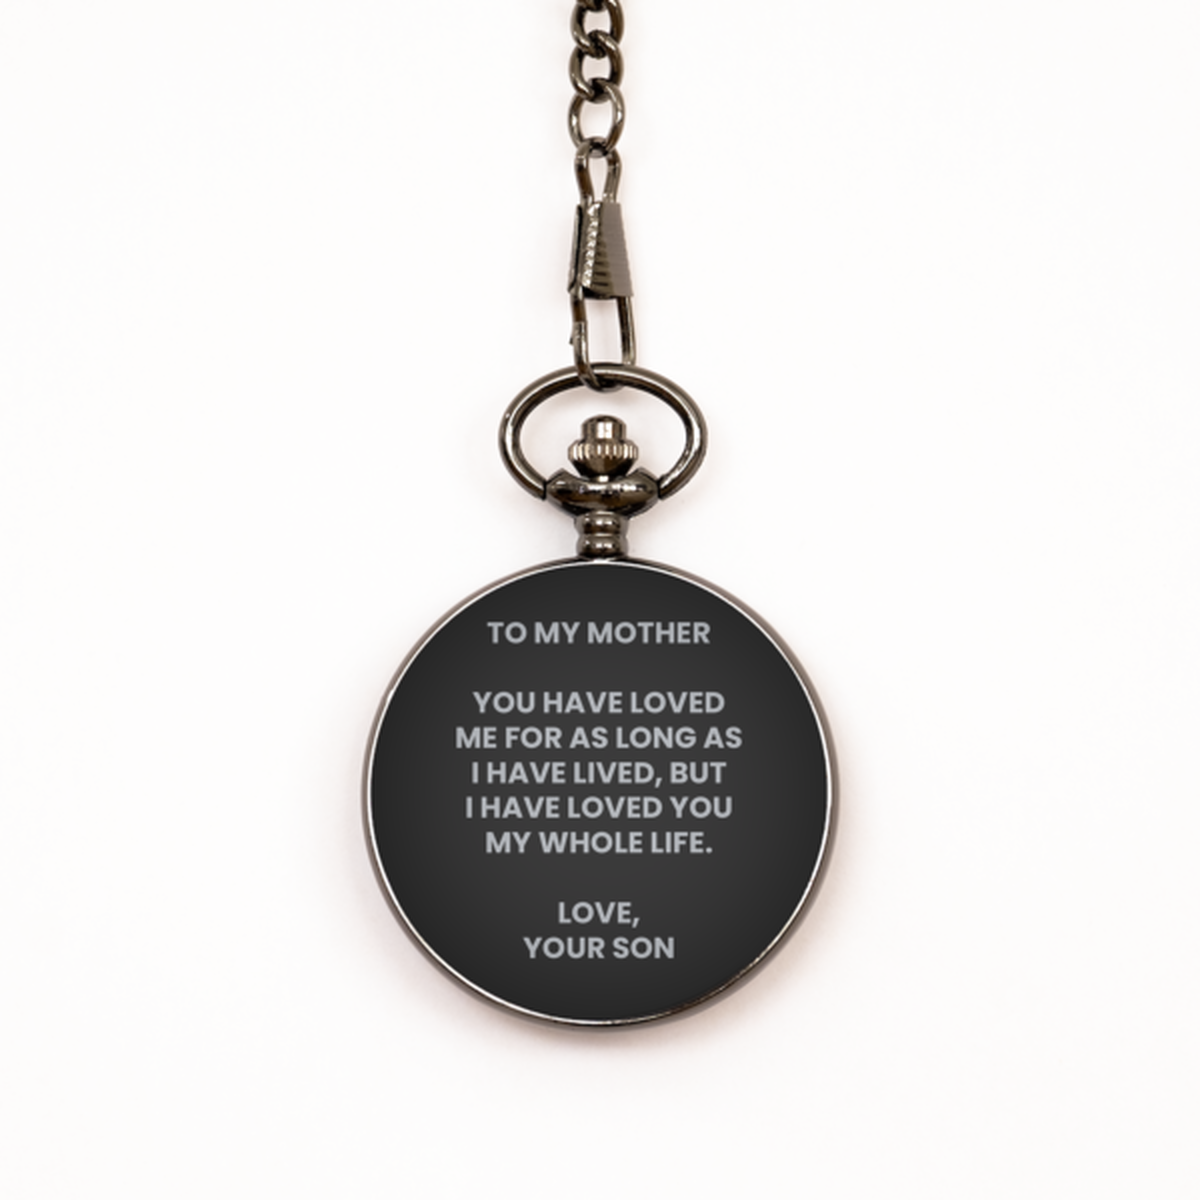 To My Mother Black Pocket Watch, My Whole Life, Mothers Day Gifts For Mother From Son, Birthday Gifts For Women